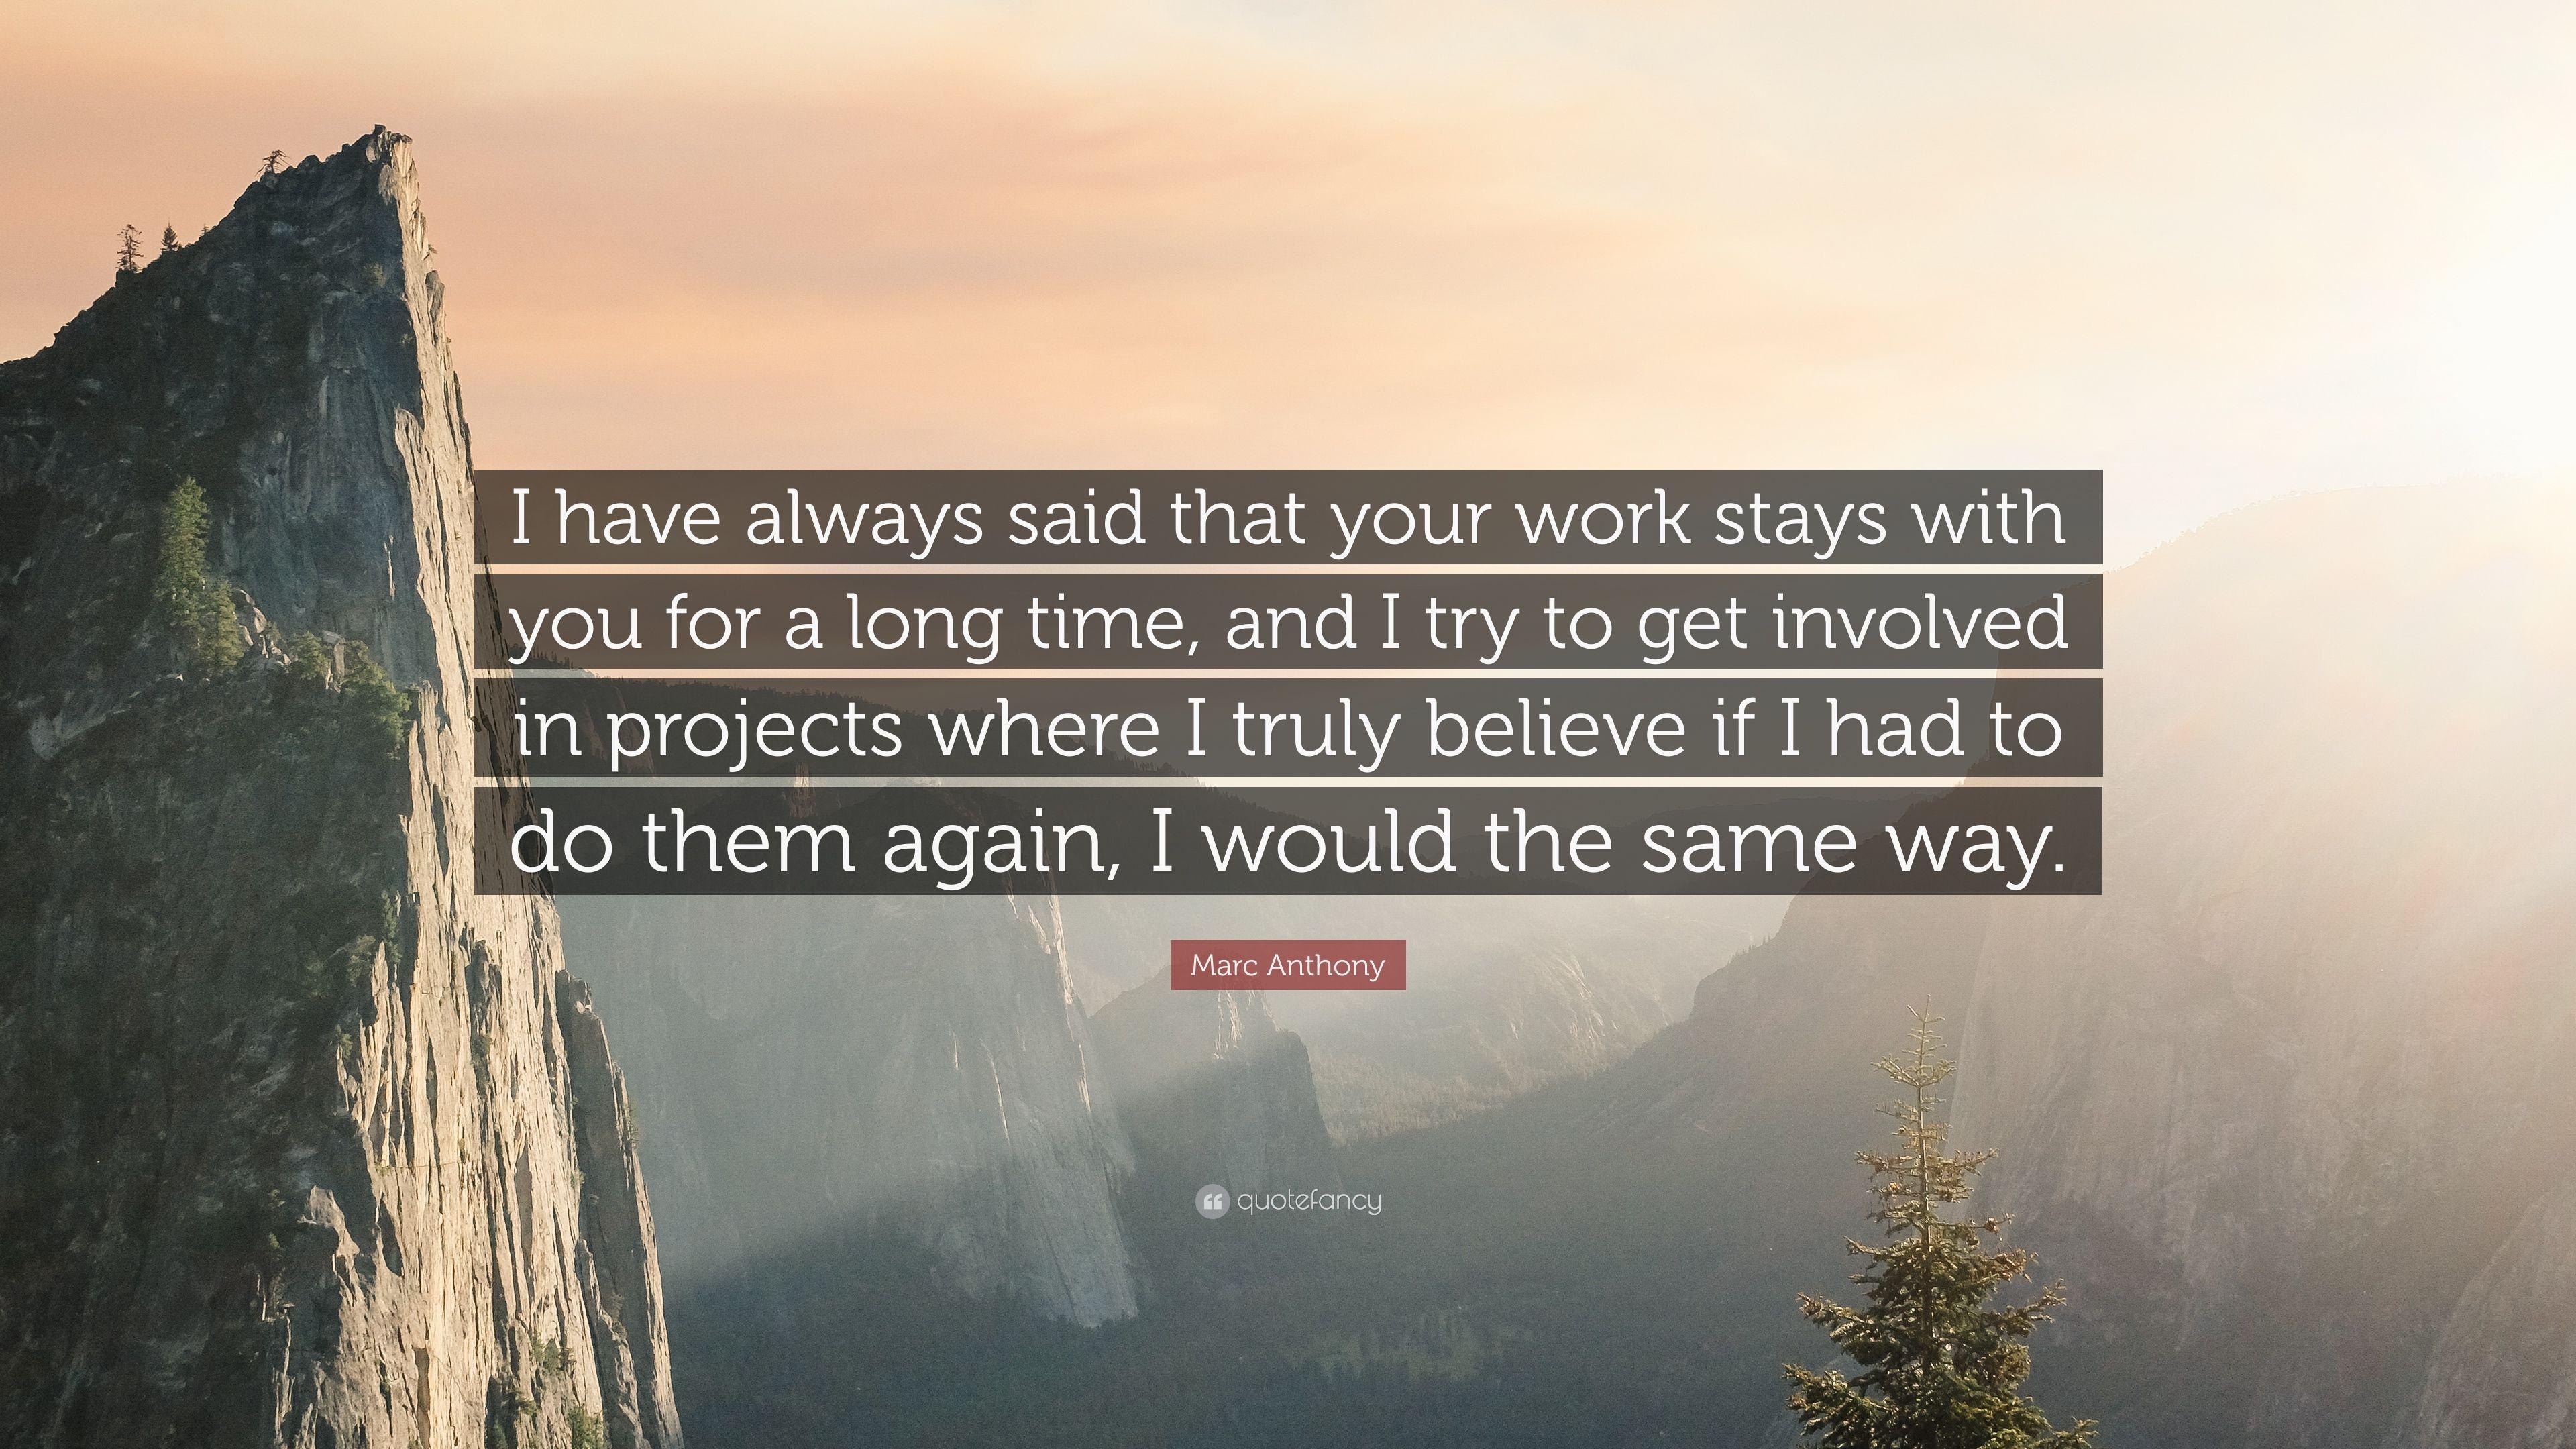 Marc Anthony Quote: “I have always said that your work stays